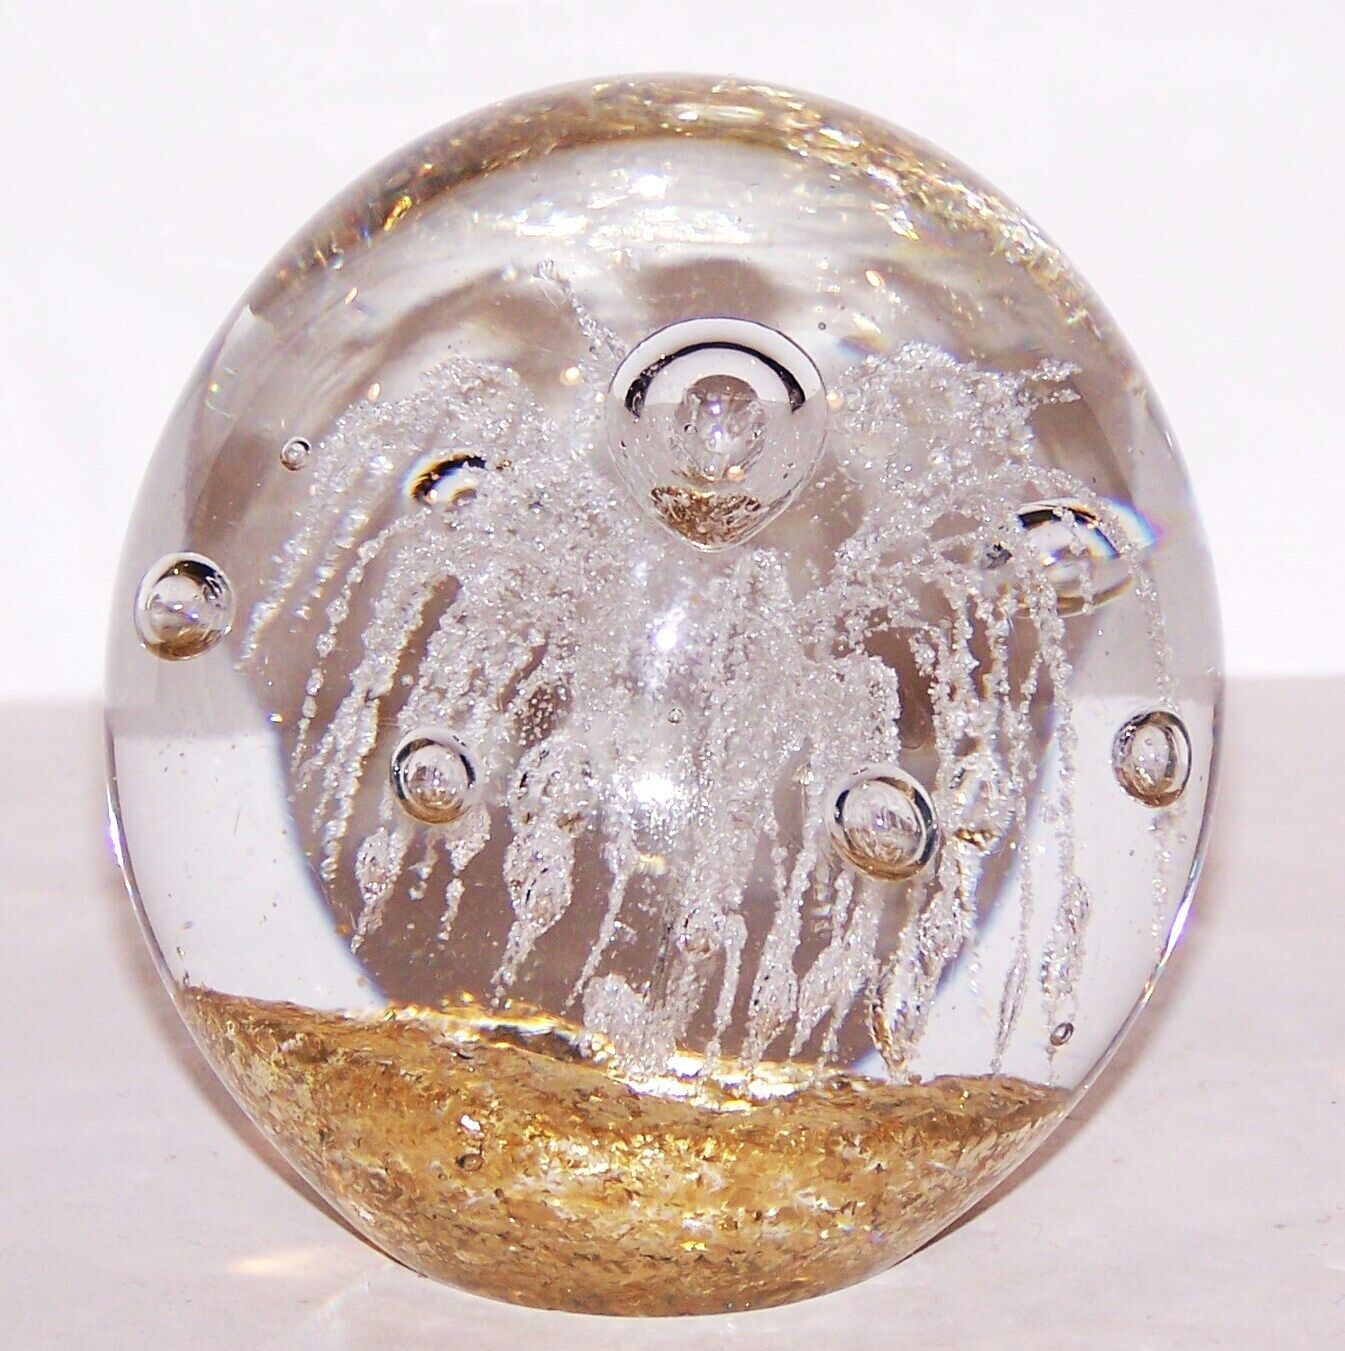  2011 STERLING\'S BEST OF THE BEST ART GLASS BUBBLES GOLD AVENTURINE PAPERWEIGHT